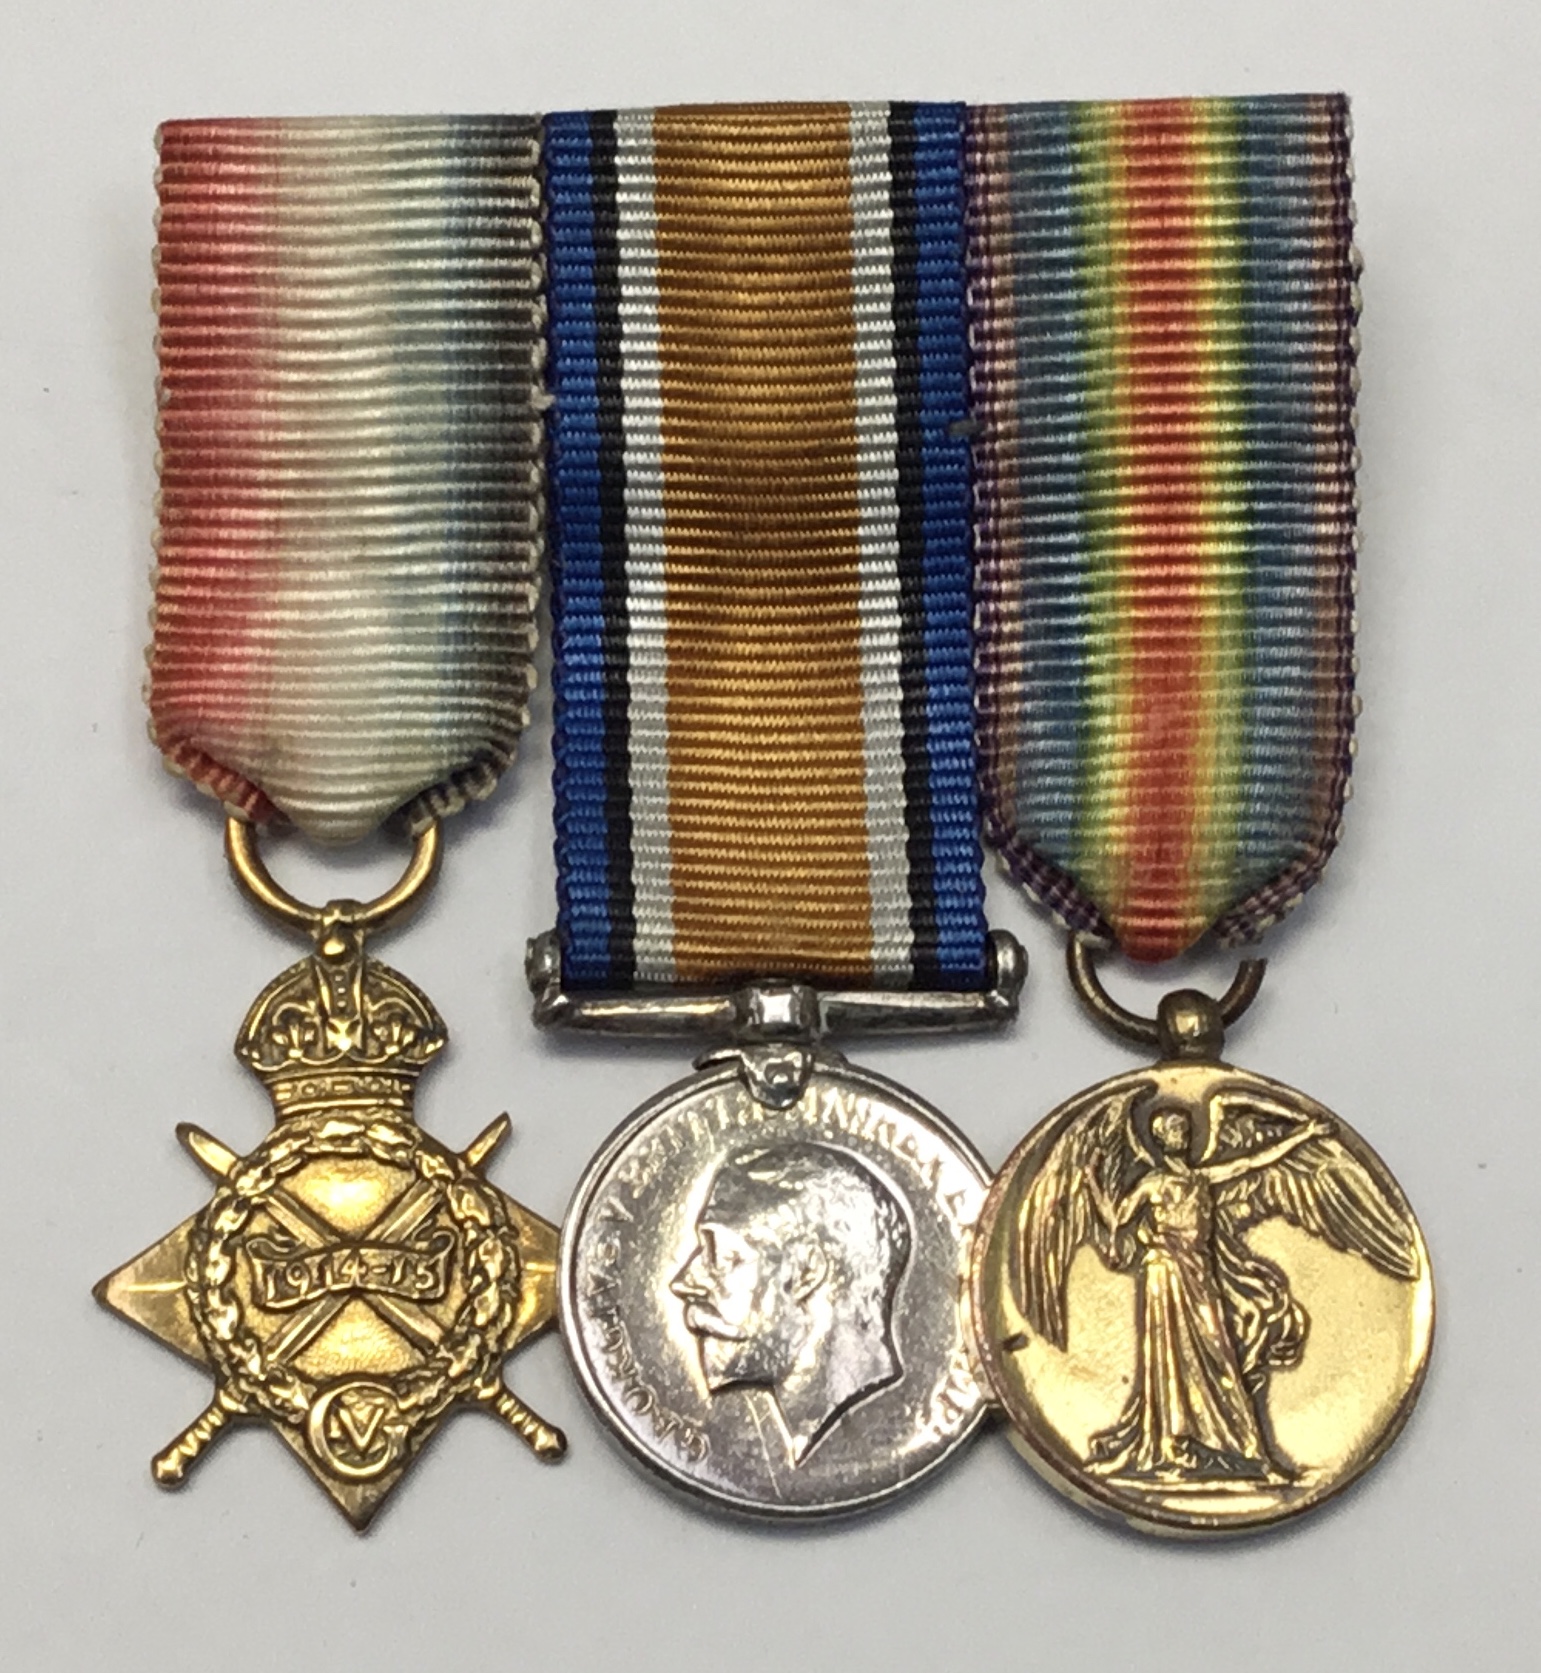 A WW2 British War Medal (disc only), awarded to M.Z.2709 Ord Thomas Blundell of the Royal Navy - Image 4 of 5